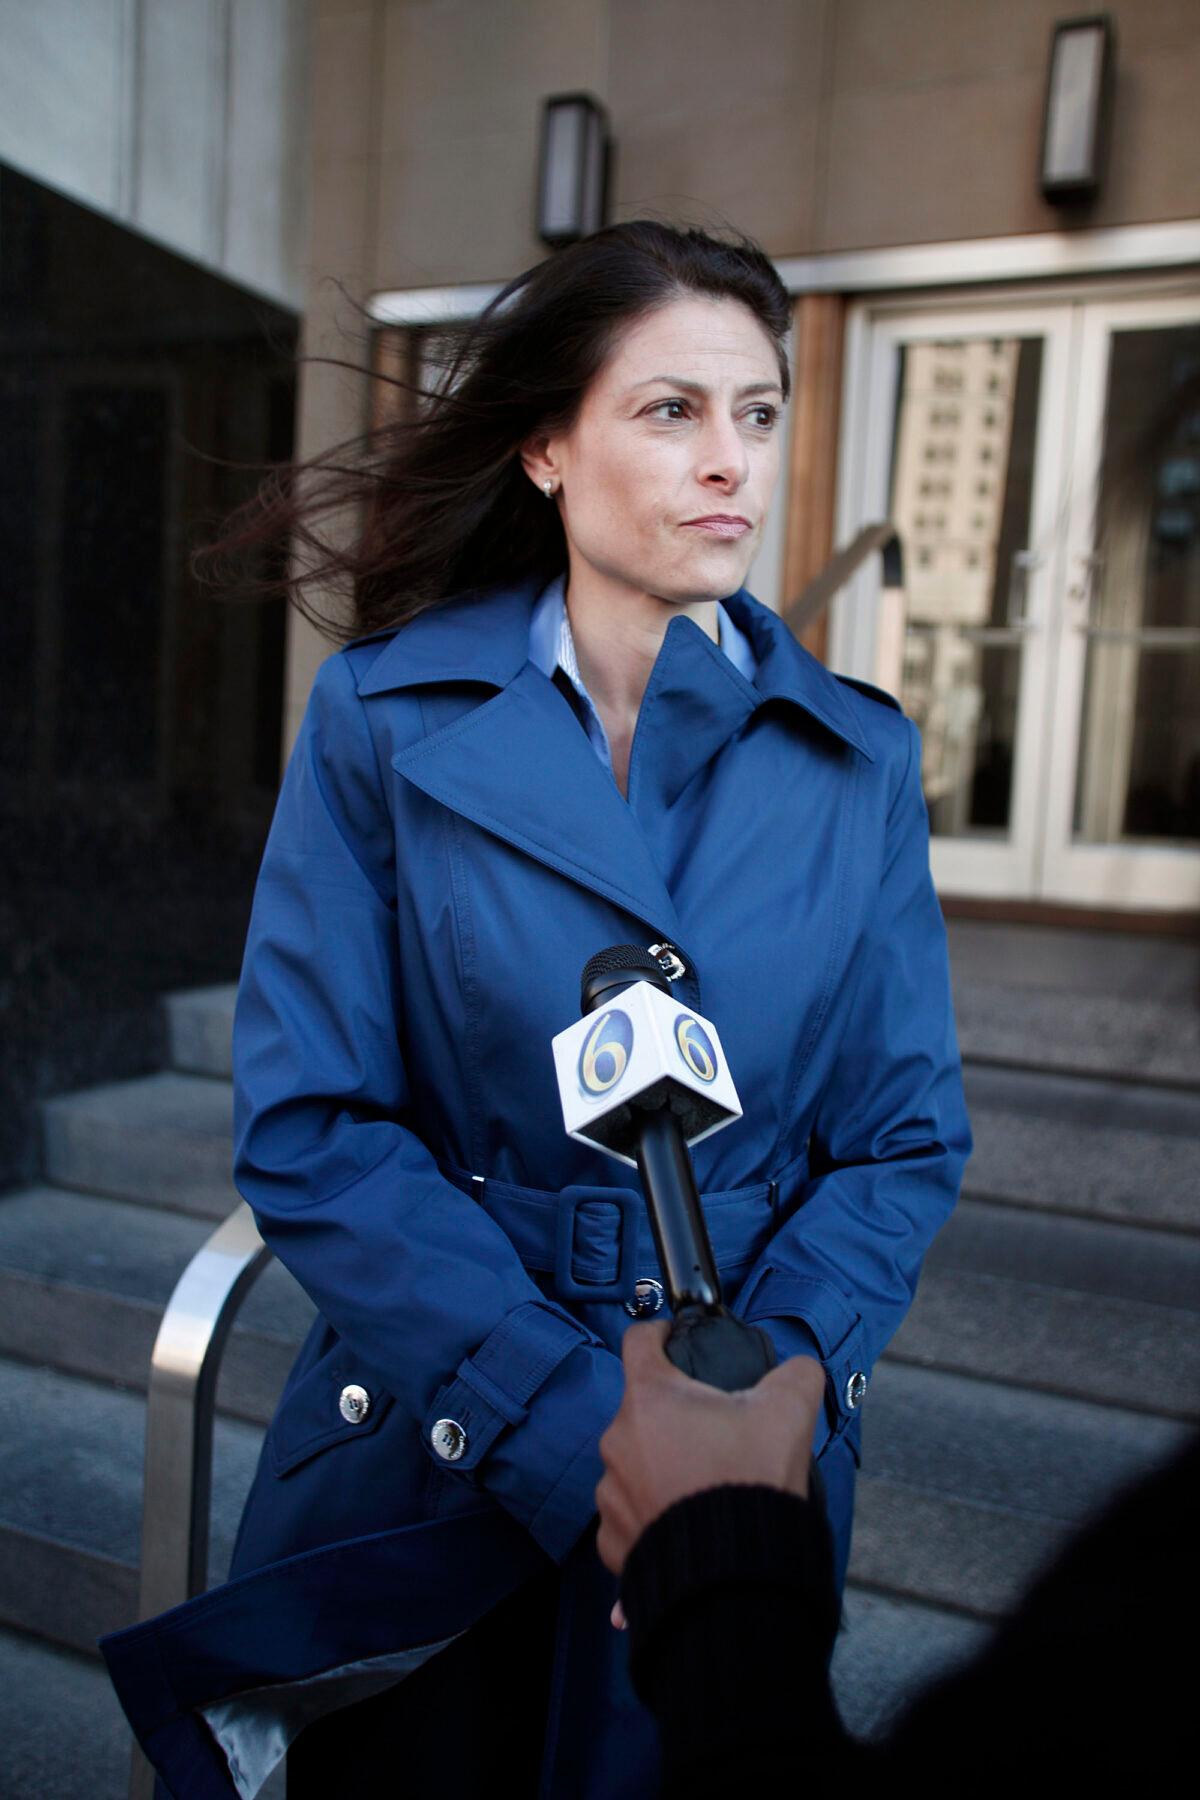 Dana Nessel, then-attorney, speaks to reporters in Detroit, on Oct. 16, 2013. (Bill Pugliano/Getty Images)